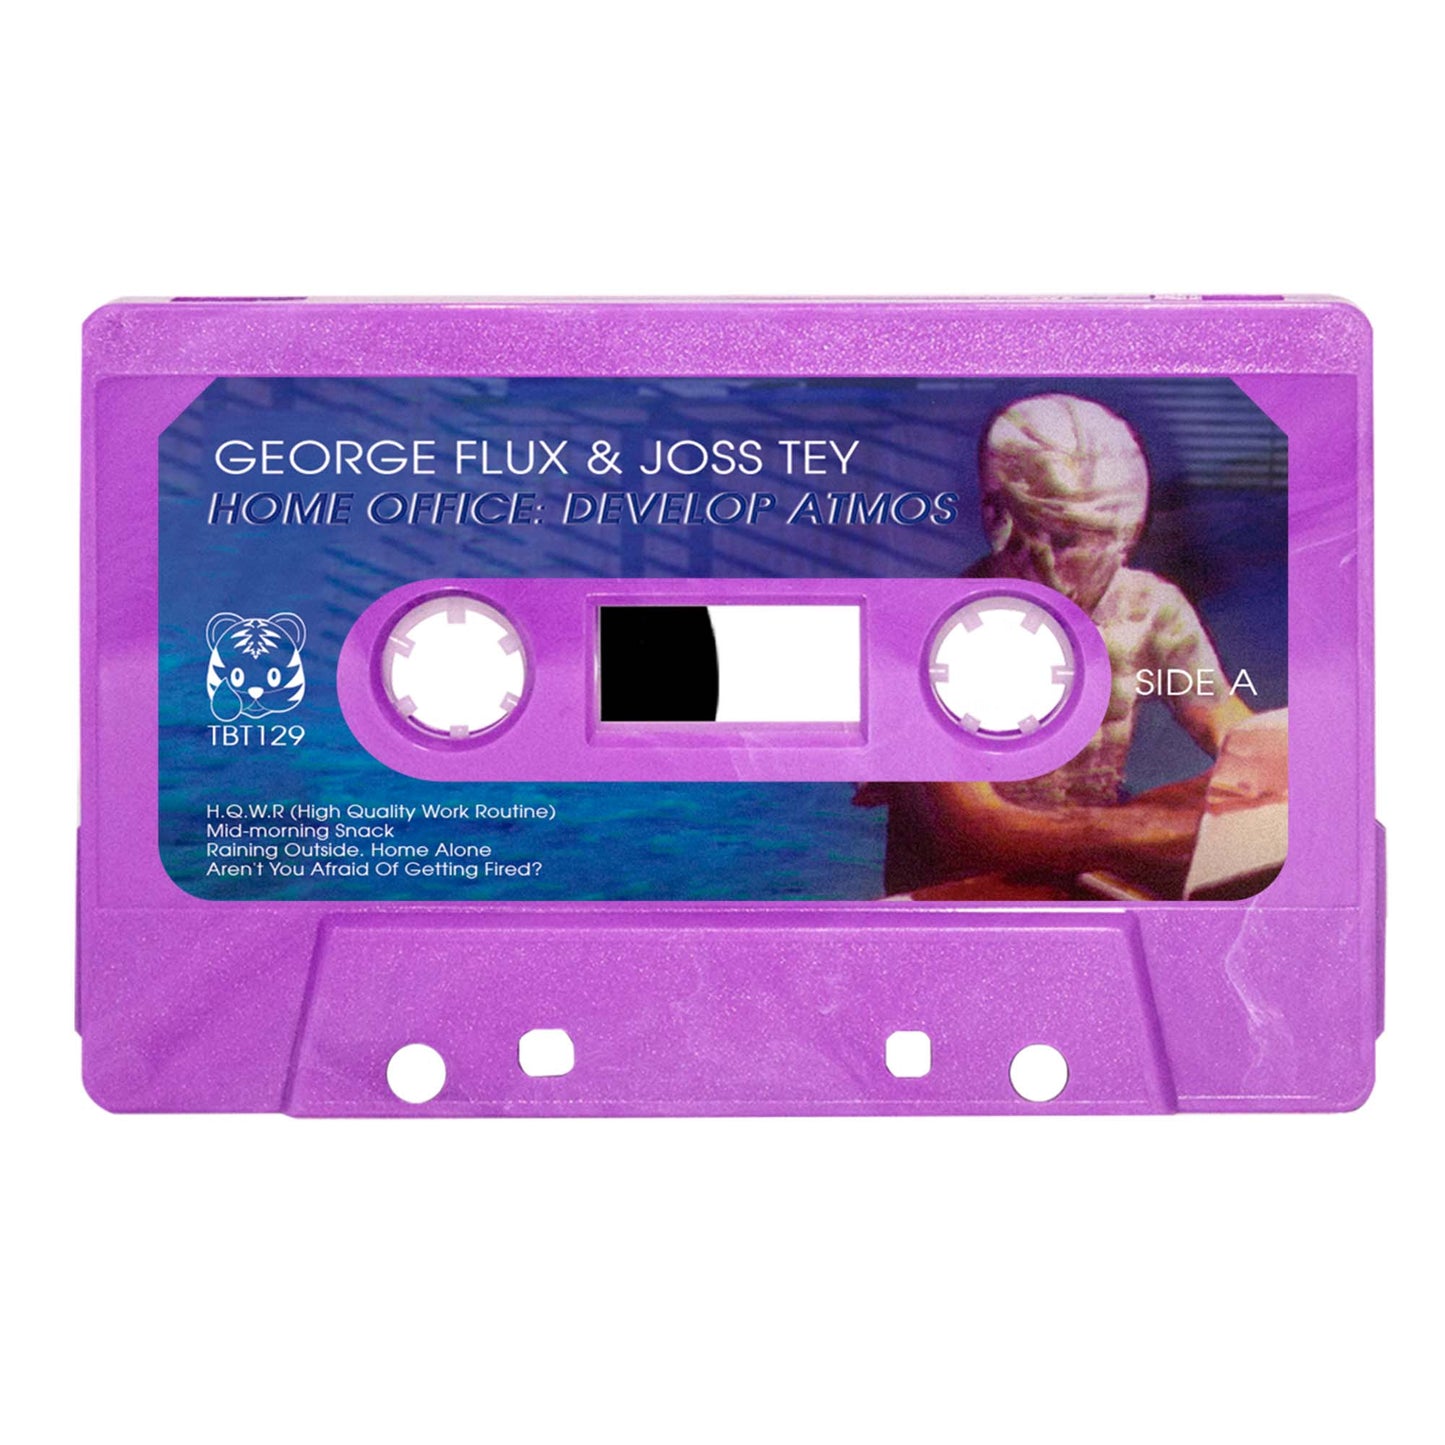 GEORGE FLUX & JOSS TEY - "HOME OFFICE: DEVELOP ATMOS" Limited Edition Cassette Tape